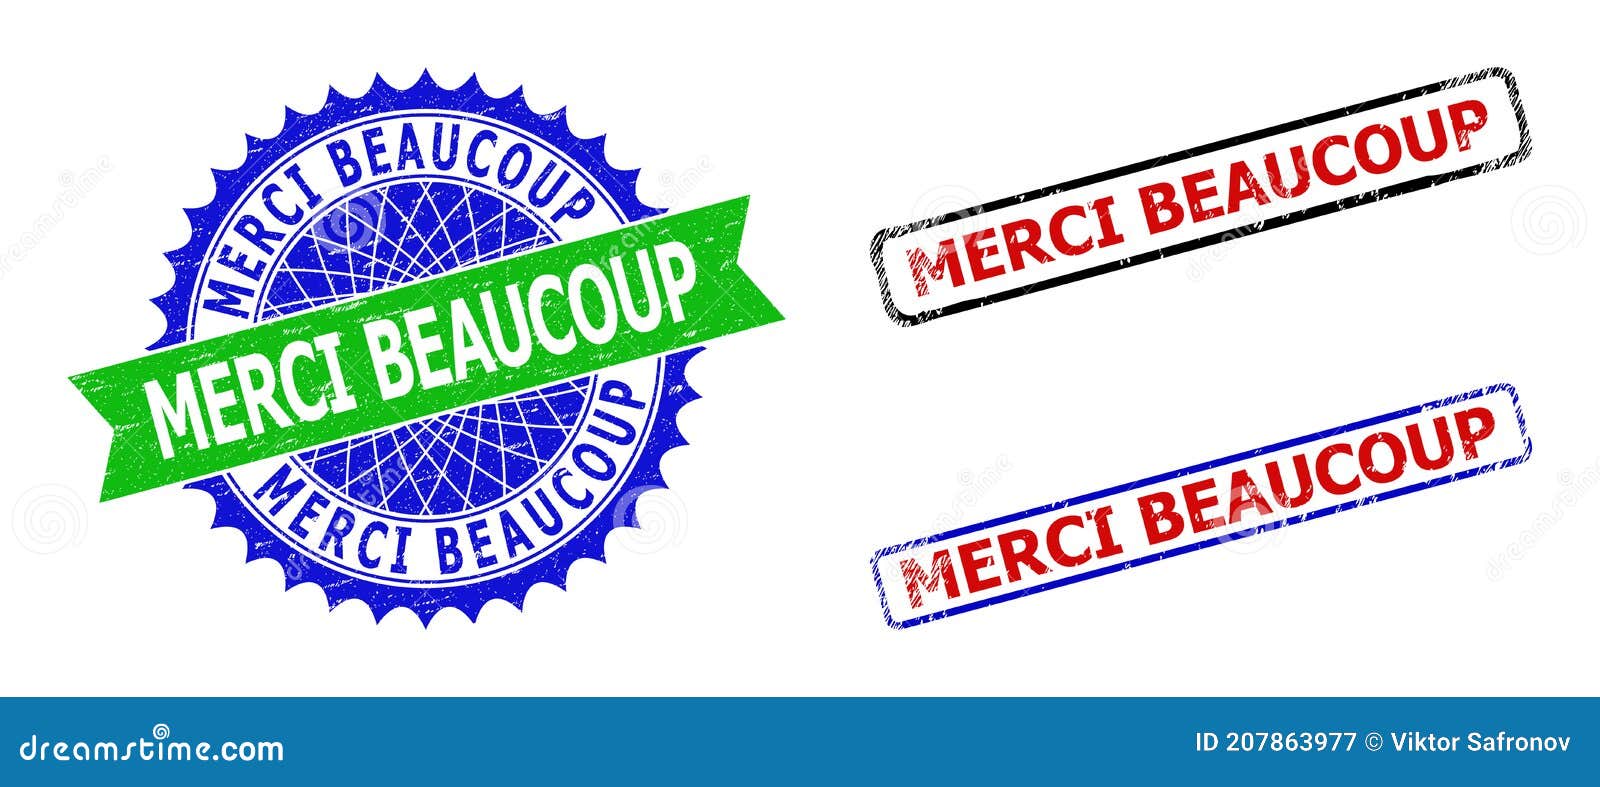 merci beaucoup rosette and rectangle bicolor badges with distress surfaces